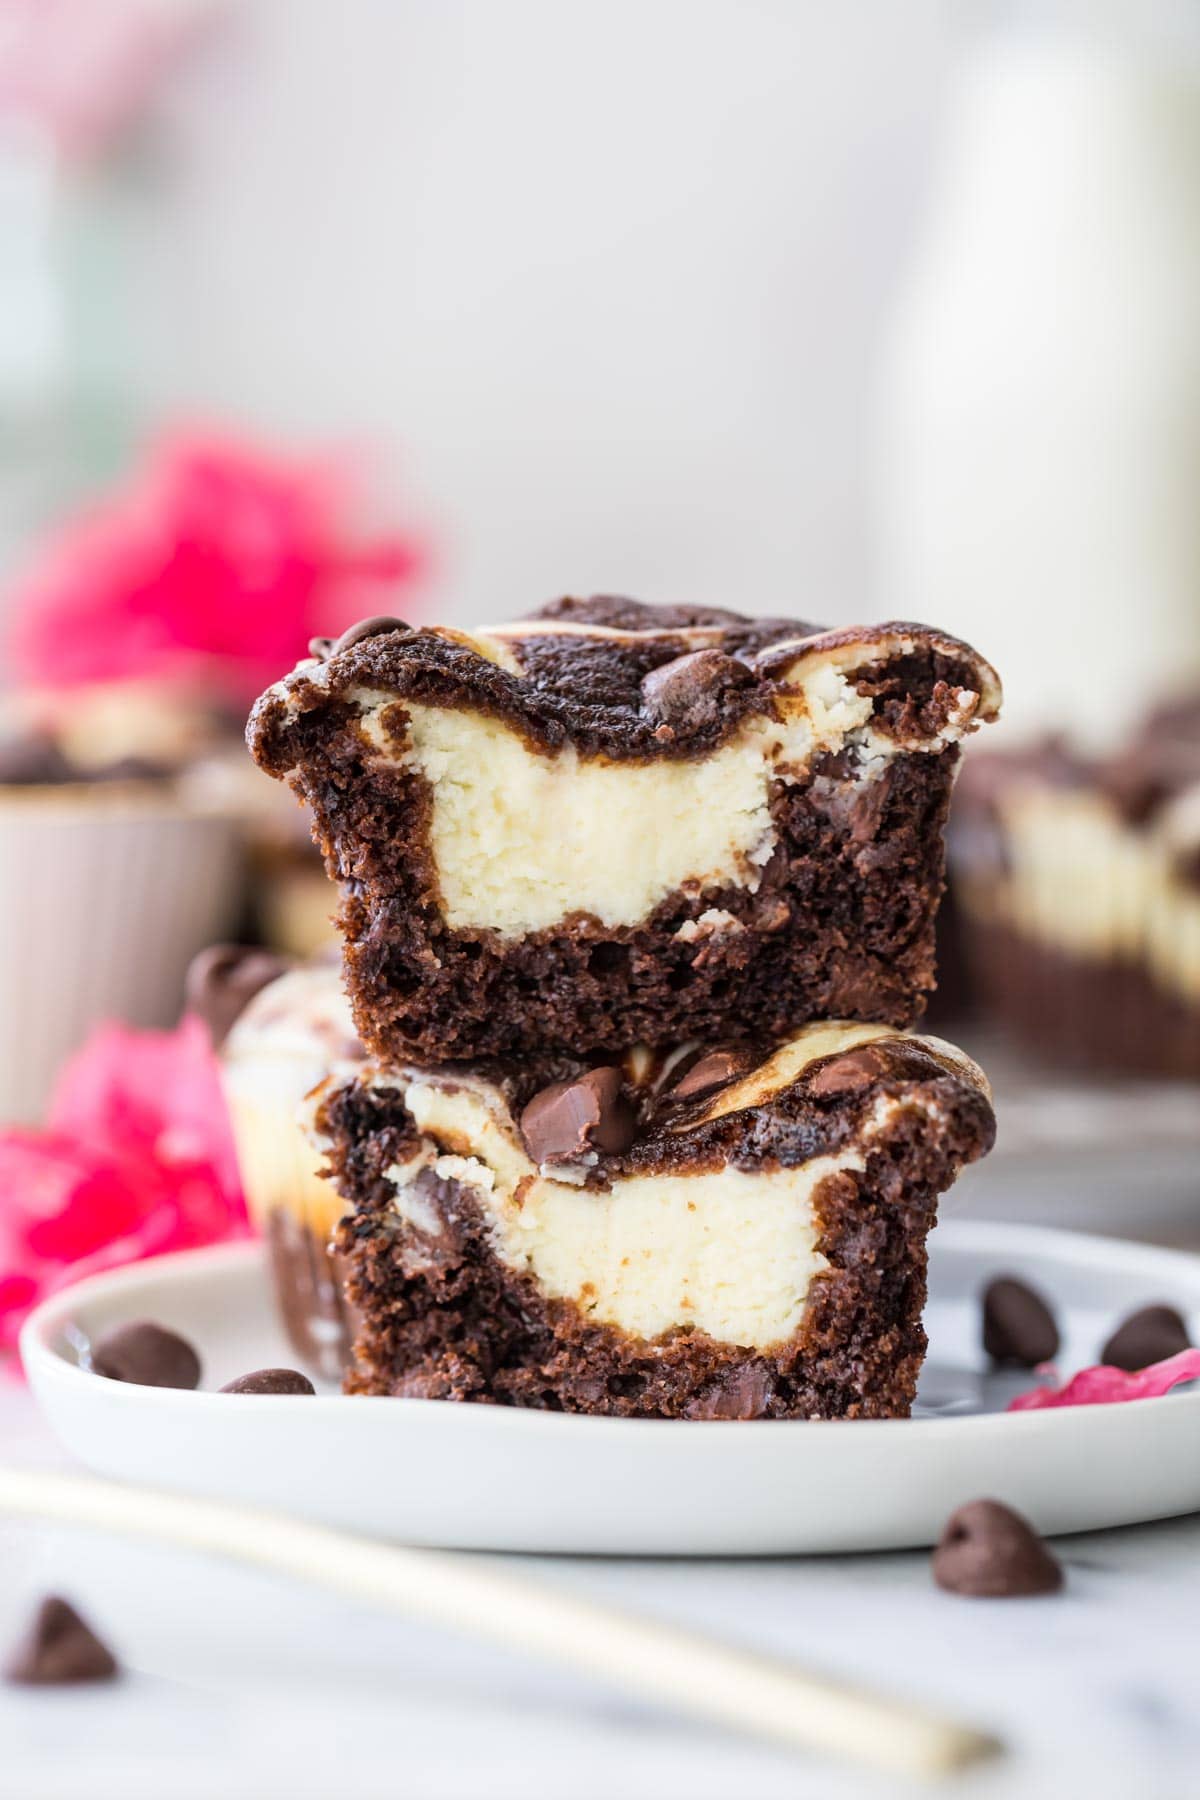 a chocolate cheesecake muffin cut in half and stacked on top of itself to show creamy cheesecake center.